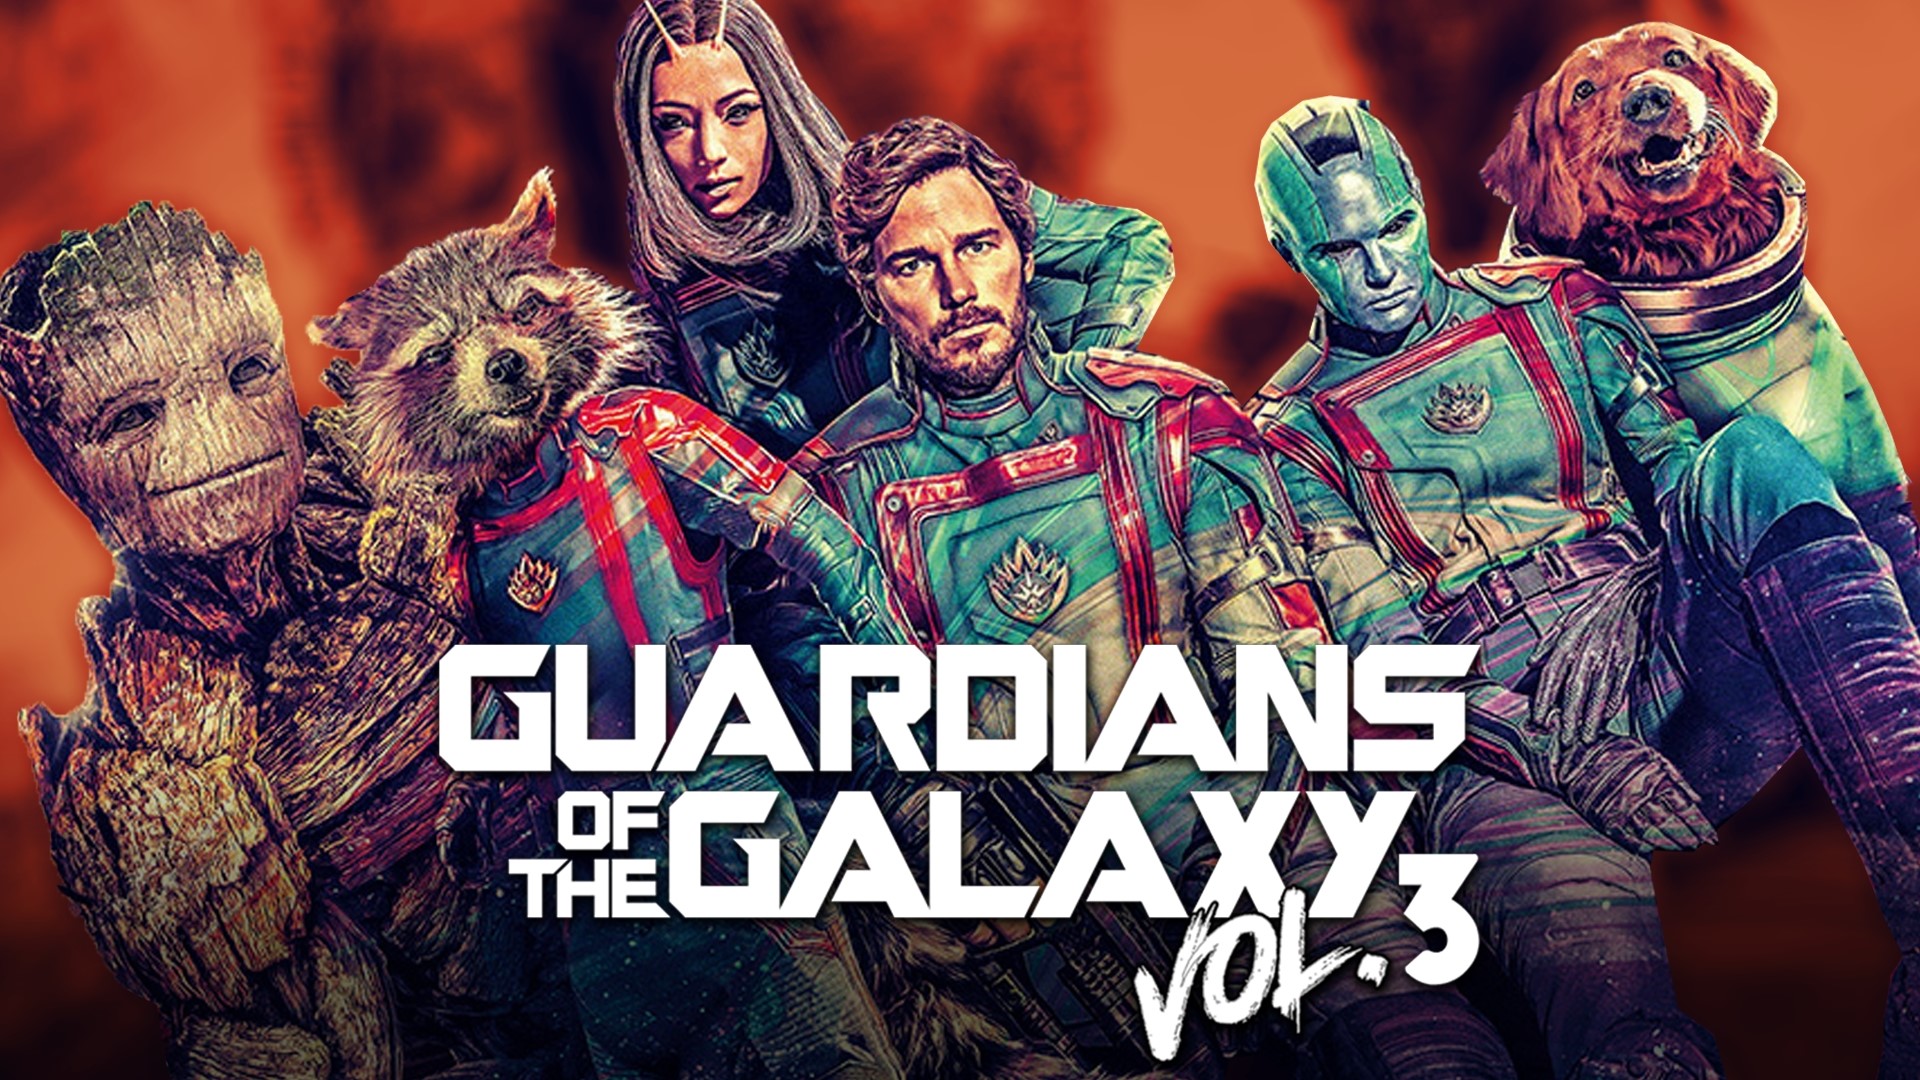 In what is essentially a greatest hits for the Guardians of the Galaxy, the crew has to help Rocket Raccoon while battling the High Evolutionary.